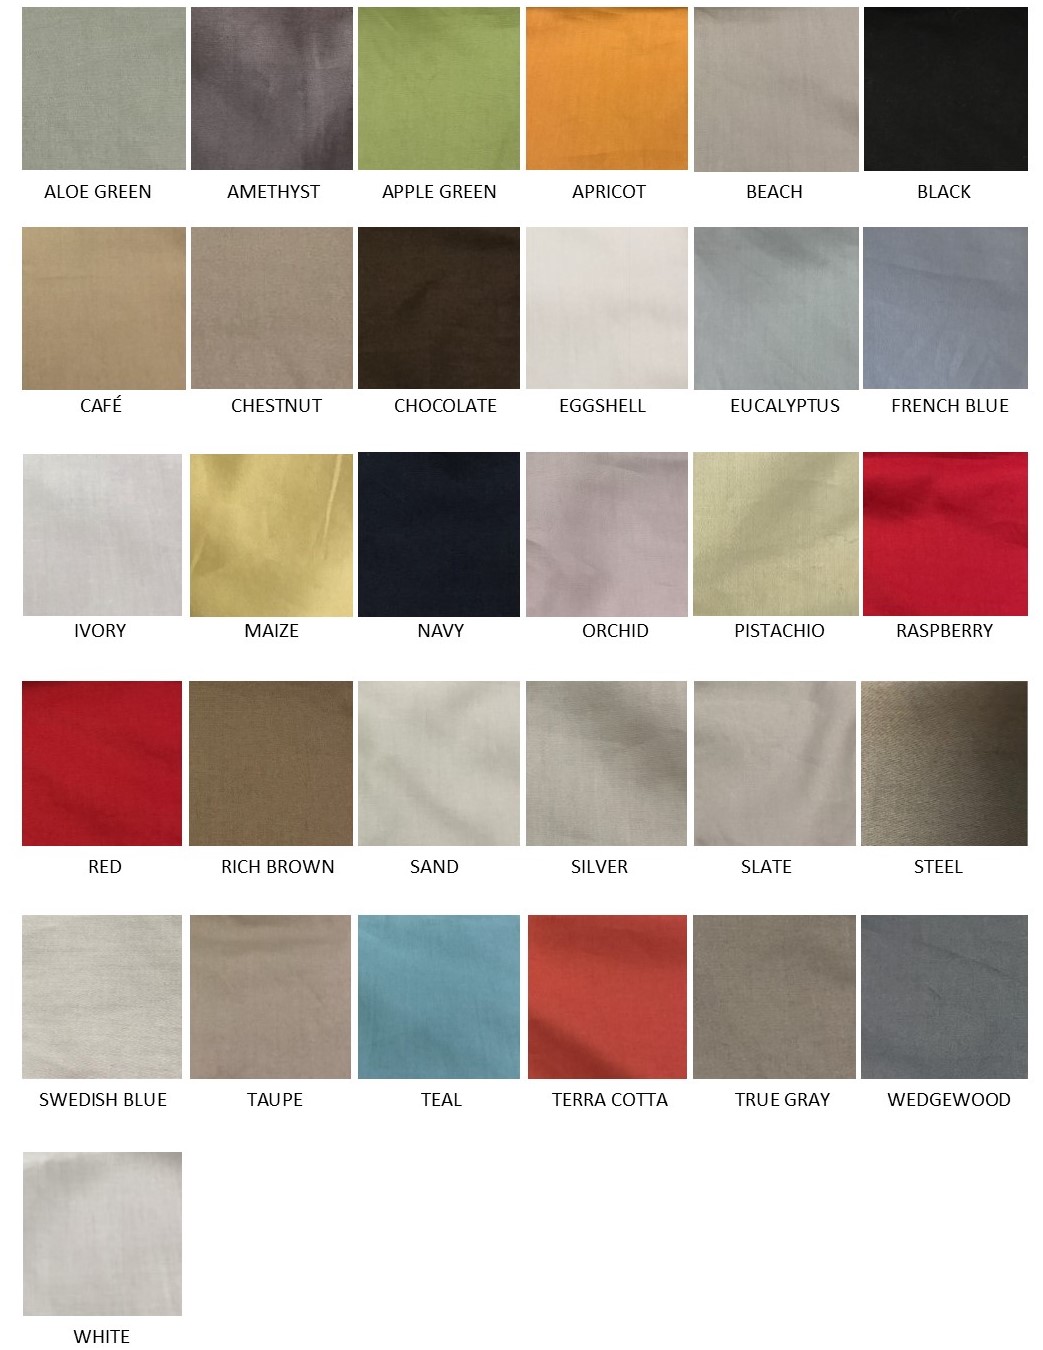 TL at home Bedding Base Sheet & Sateen Color Swatch Set